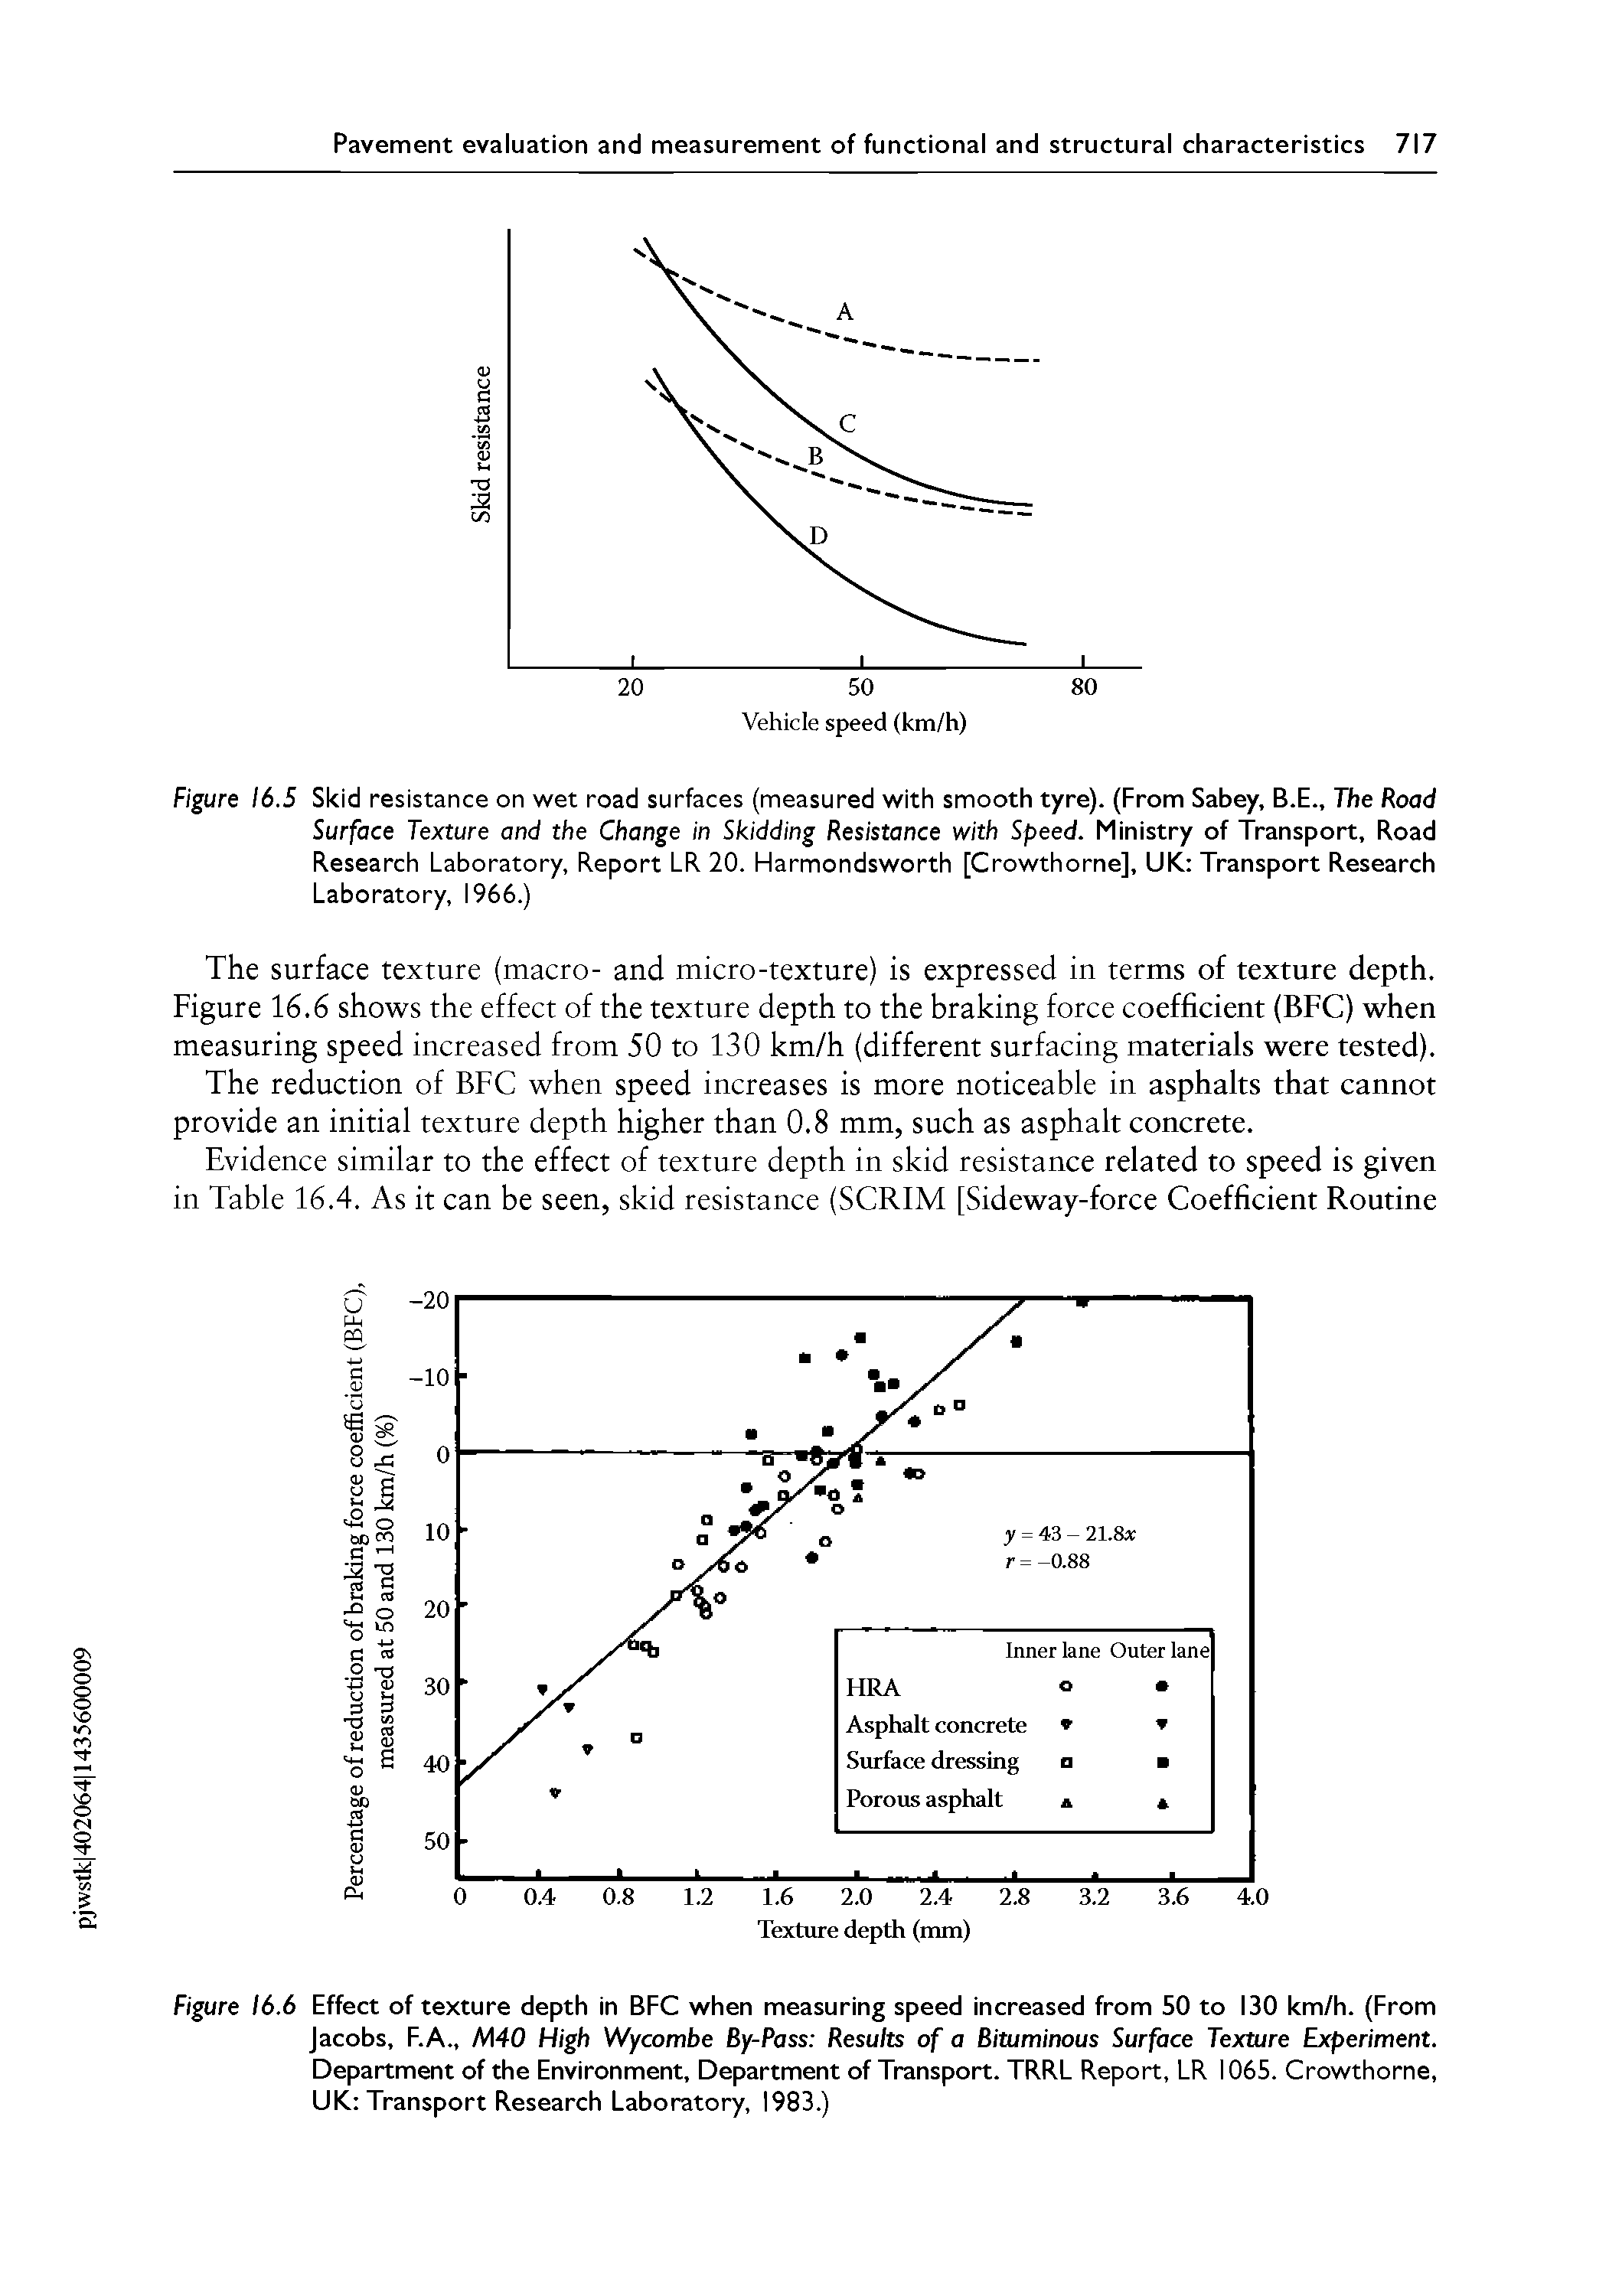 Figure 16.5 Skid resistance on wet road surfaces (measured with smooth tyre). (From Sabey, B.E., The Road Surface Texture and the Change in Skidding Resistance with Speed. Ministry of Transport, Road Research Laboratory, Report LR 20. Harmondsworth [Crowthorne], UK Transport Research Laboratory, 1966.)...